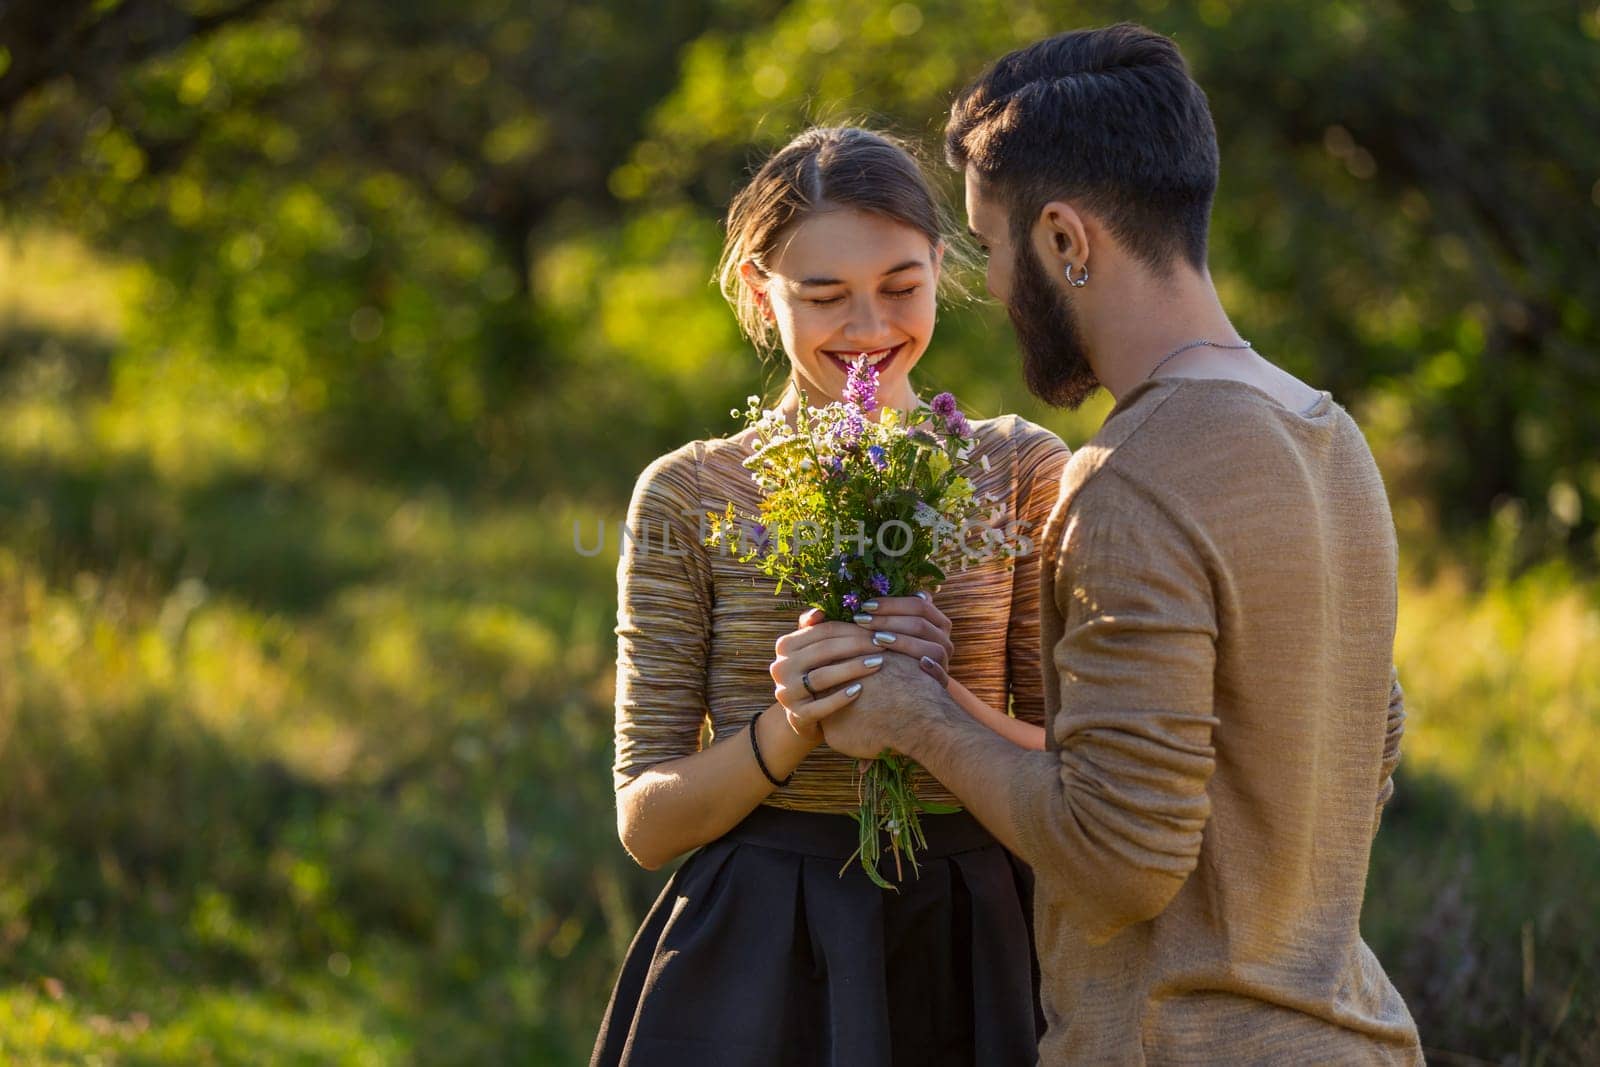 man giving wild flowers to his girlfriend